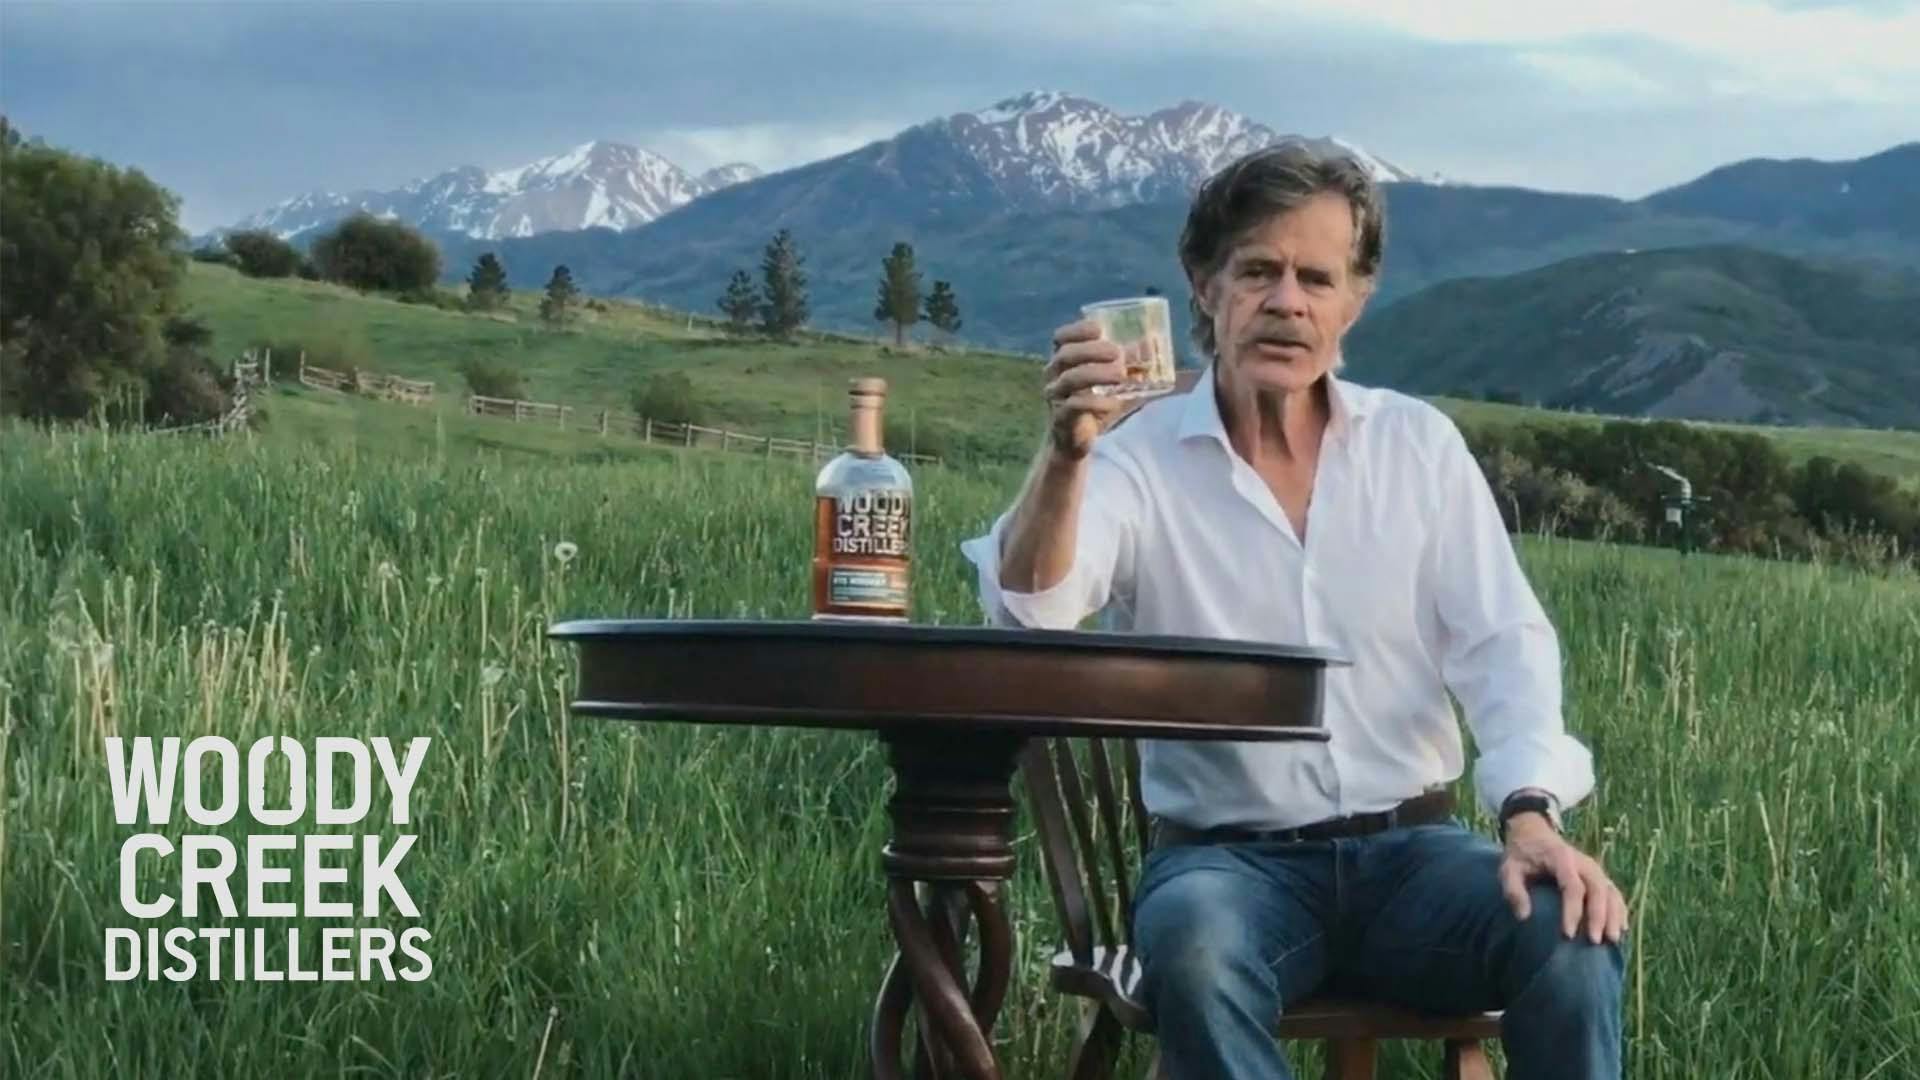 Actor William H. Macy holds a glass of Woody Creek bourbon on a field while wearing a white button-up.